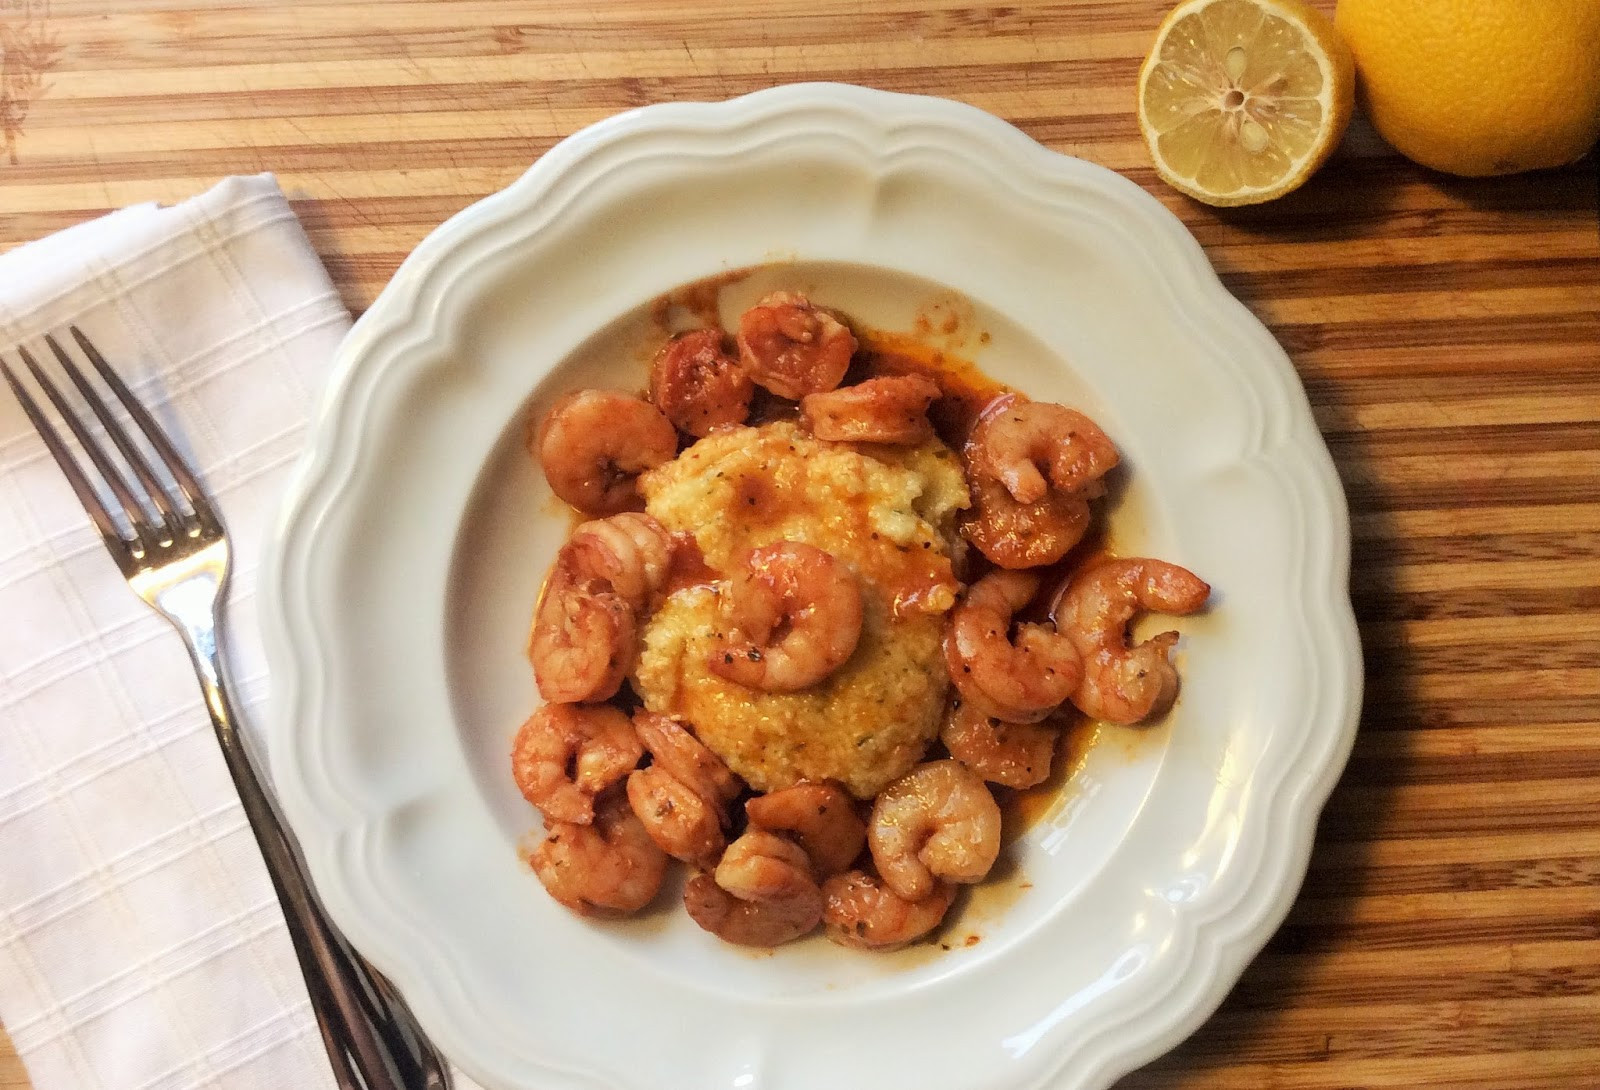 New Orleans Bbq Shrimp And Grits
 The Happy Little Hive What s for Dinner [New Orleans BBQ